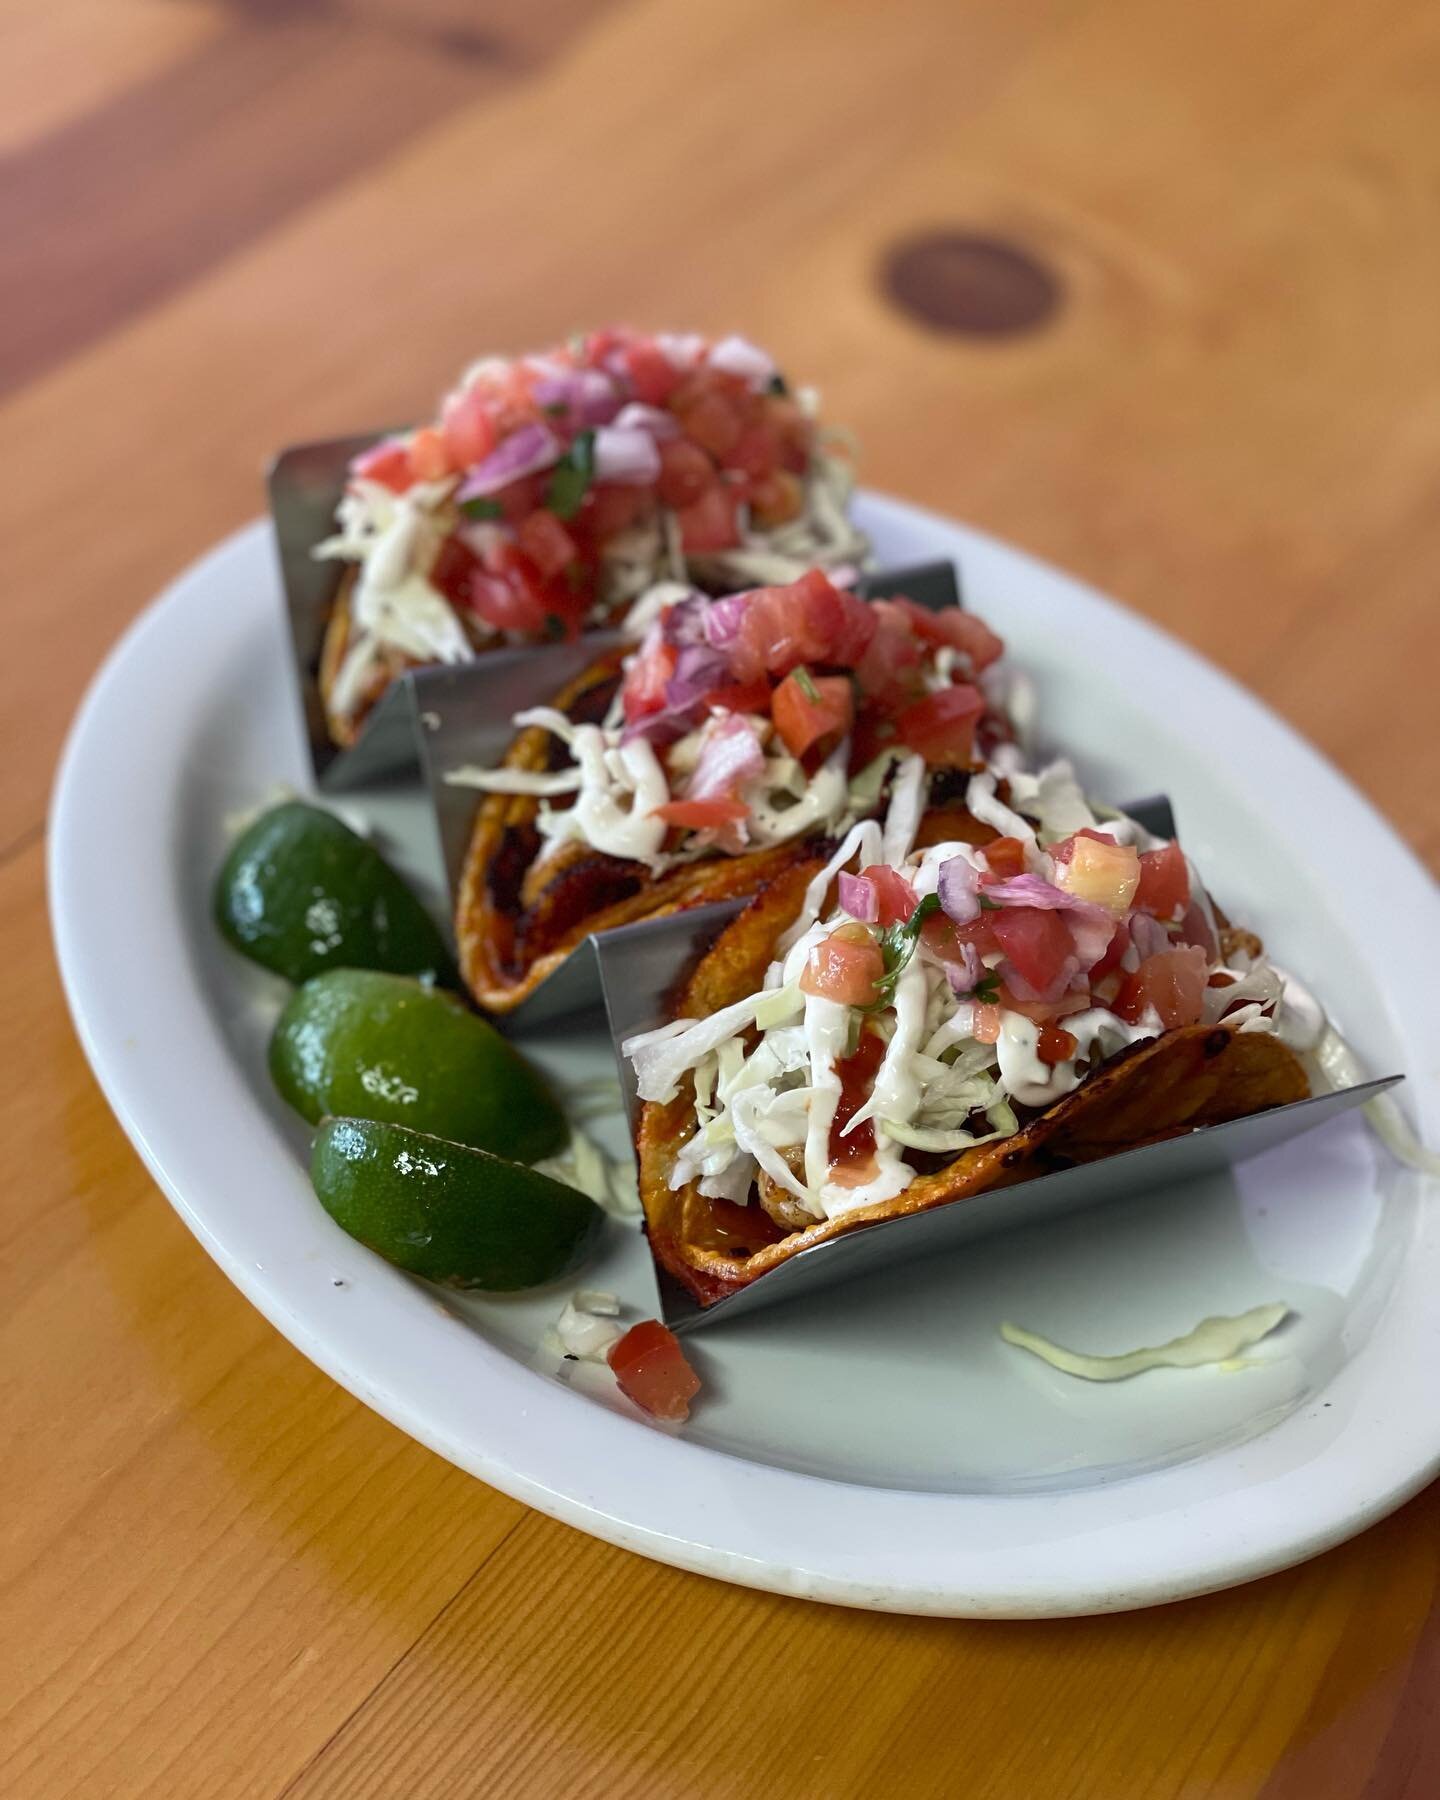 Happy Hour is ON!!! Stop by and get your hands on our new Vampiro Shrimp Tacos! 
.
.
.
.
#tacos #taco #shrimptaco #mexicanfood #seafood #happyhour #northcounty #sanmarcos #sanmarcosca #carlsbad #encinitas